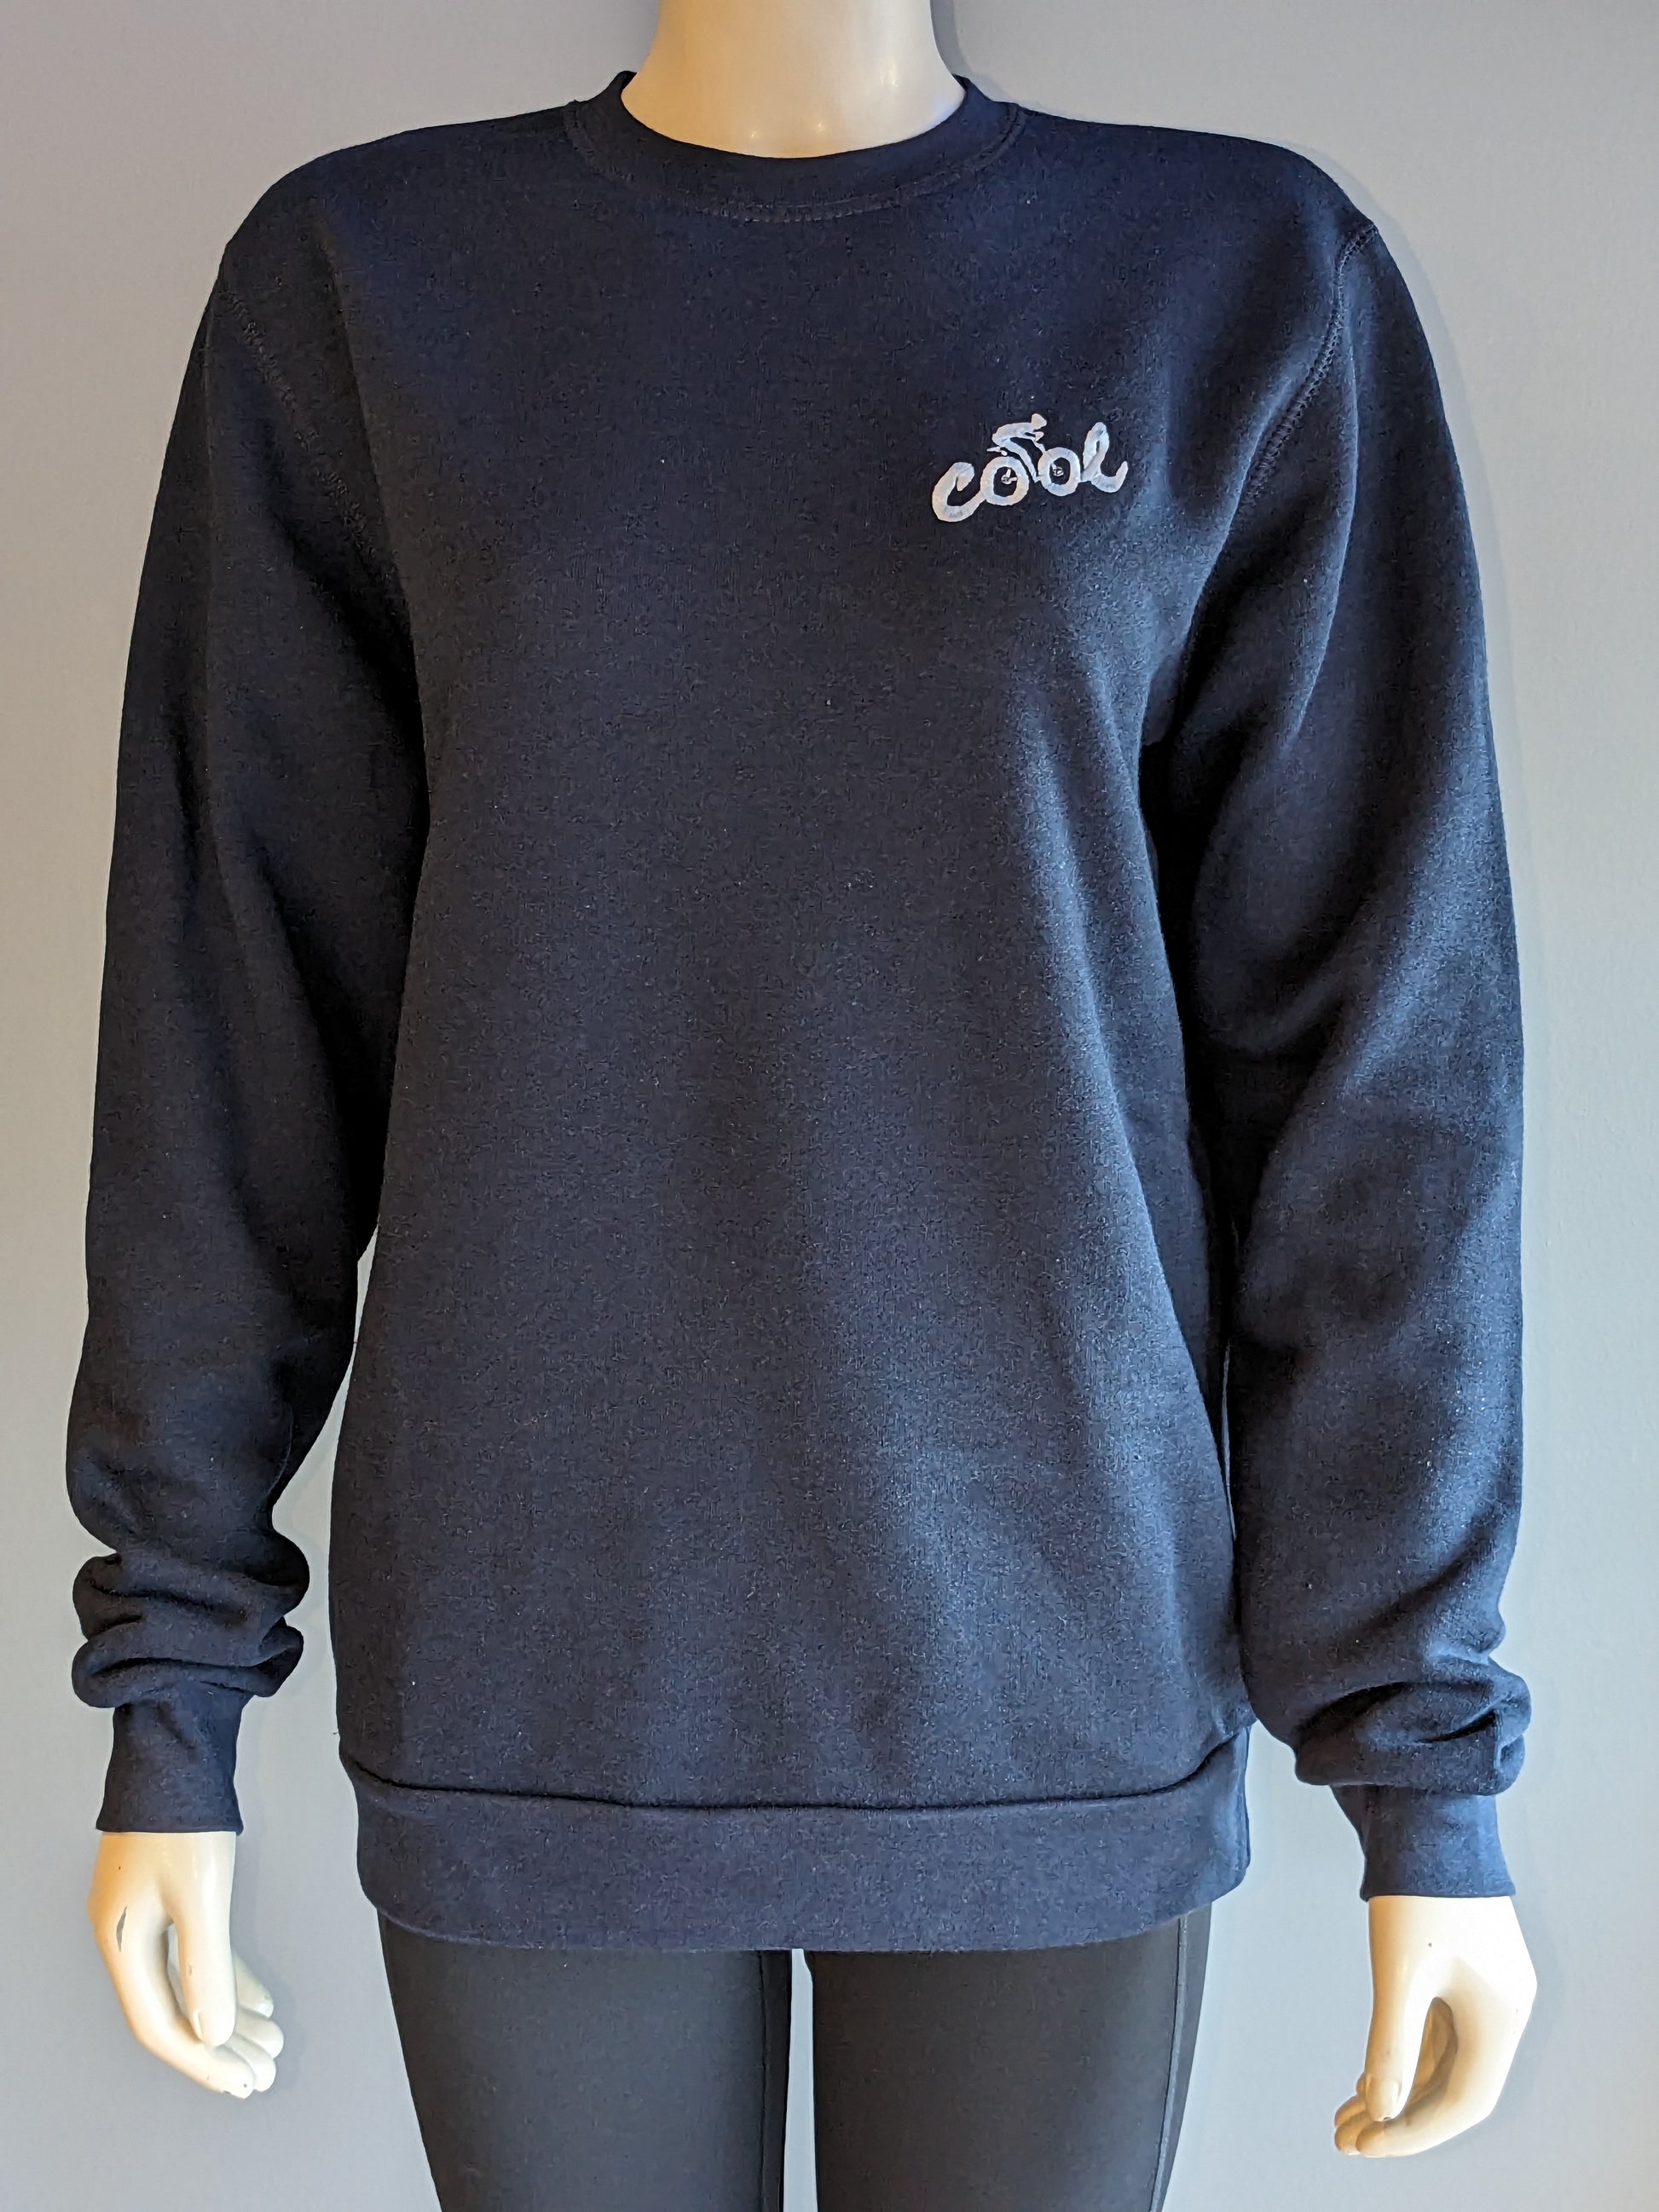 Cool Cycle embroidered Three End Bamboo Fleece Crew Neck Sweatshirt colour= navy embroidery= light blue